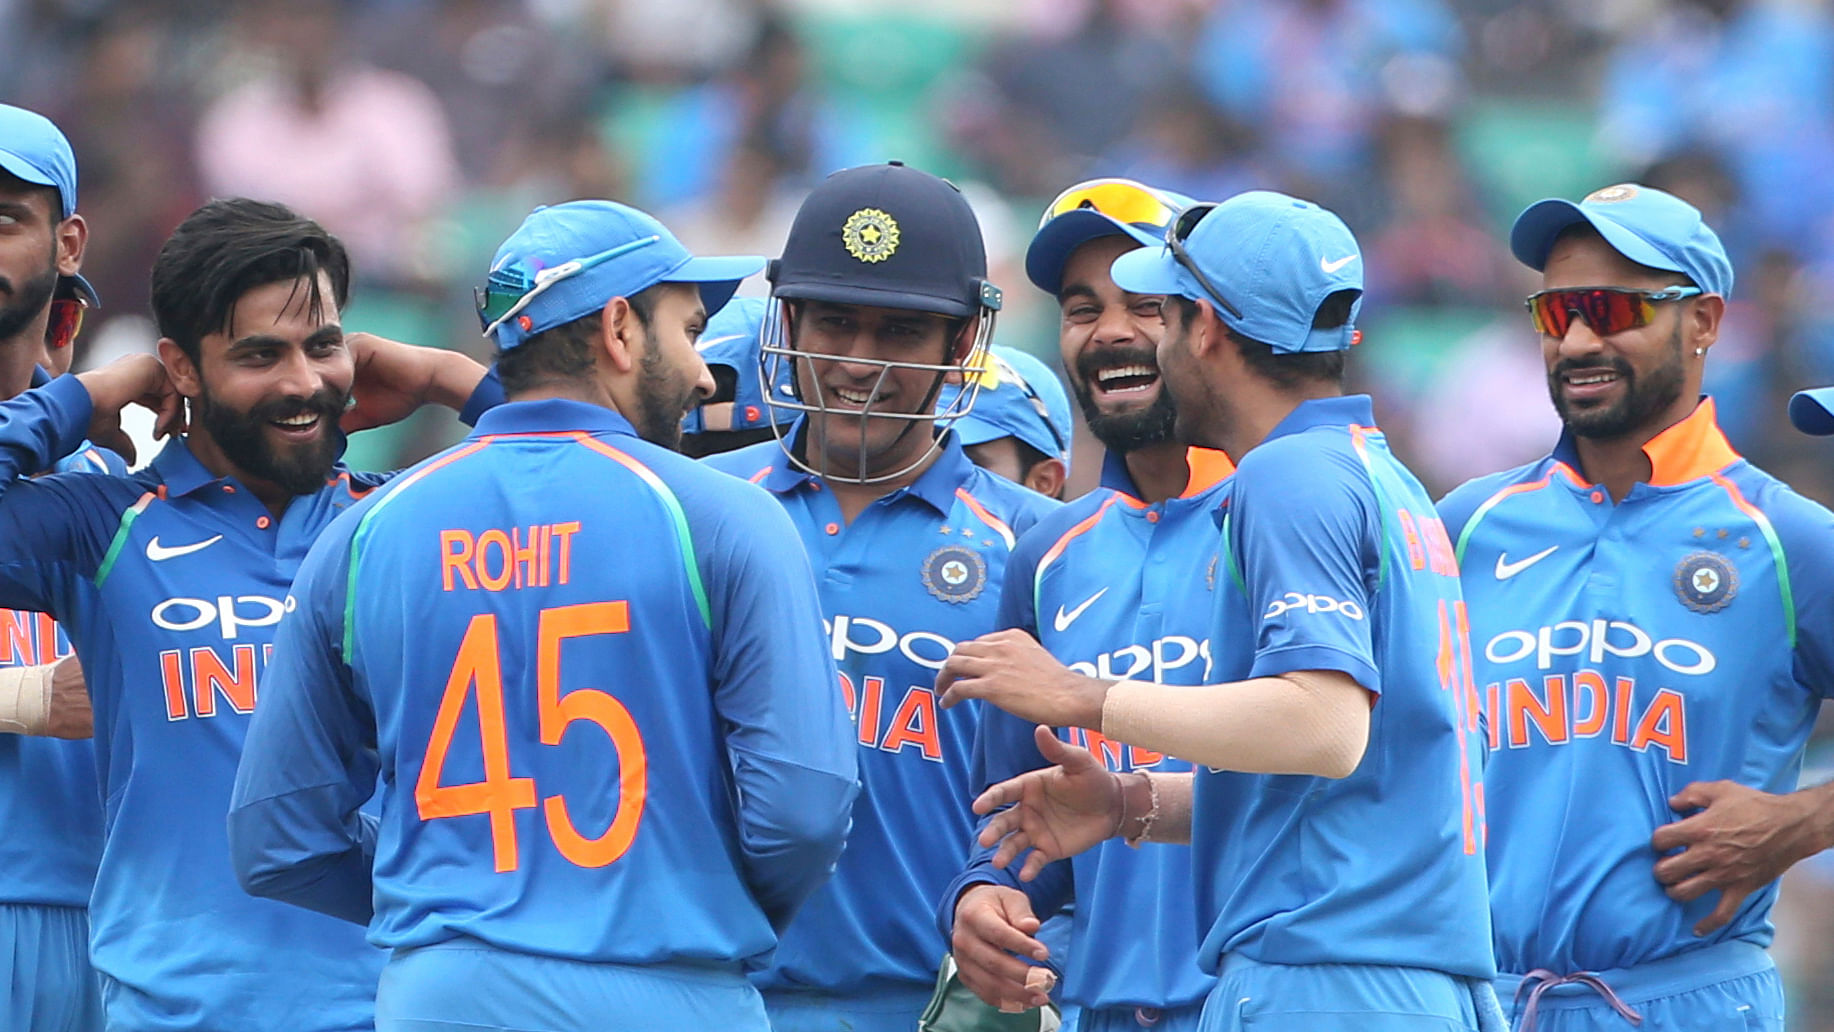 Ravindra Jadeja picked four wickets as India bowled Windies out for 104 in the fifth ODI.